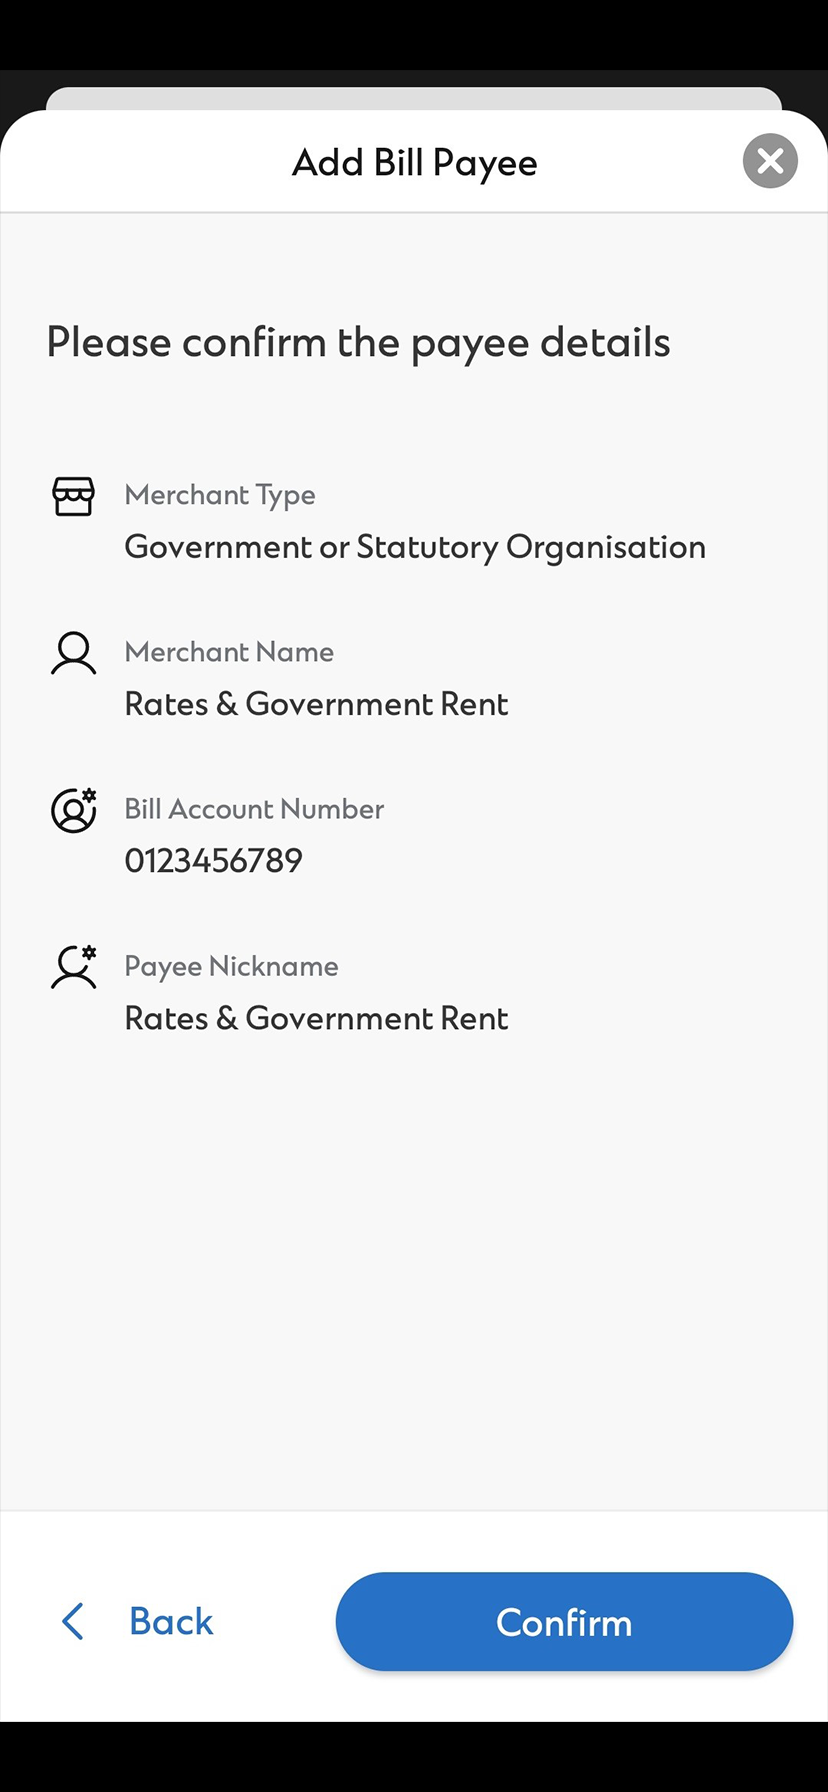 How to add bill payee via SC Mobile Step 4